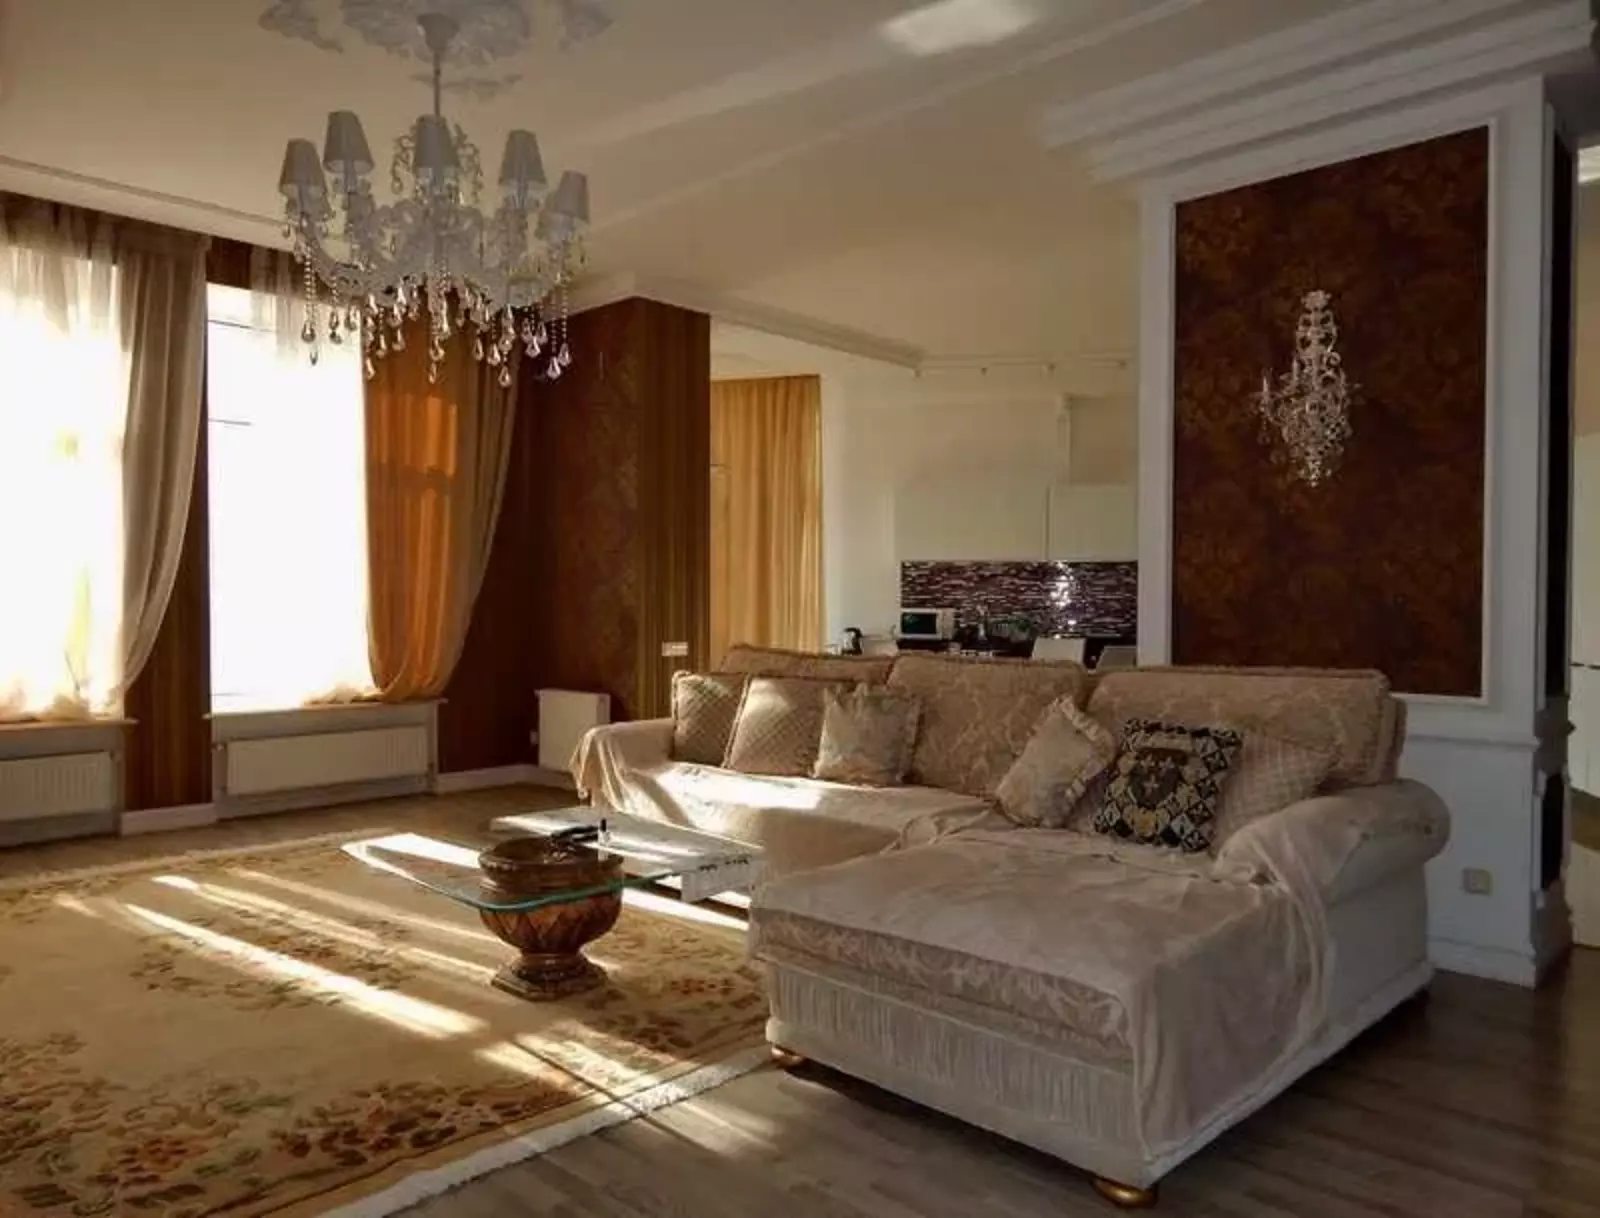 Apartment for rent. 3 rooms, 147 m², 8th floor/16 floors. 5, Lydersovskyy b-r, Odesa. 